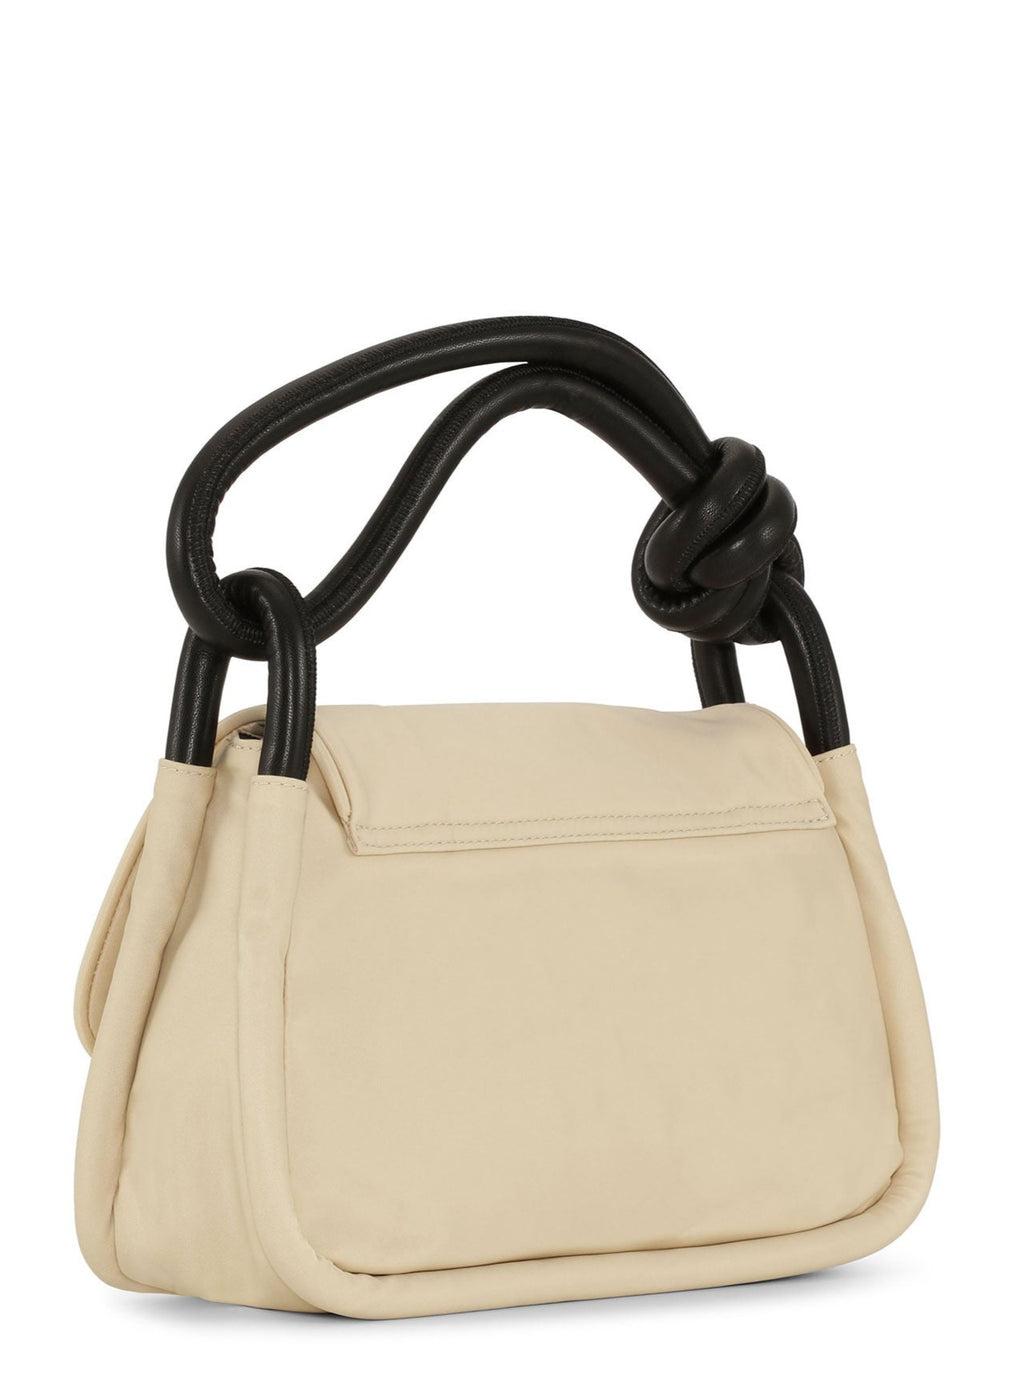 Knot Flap Over Bag in Pale Khaki